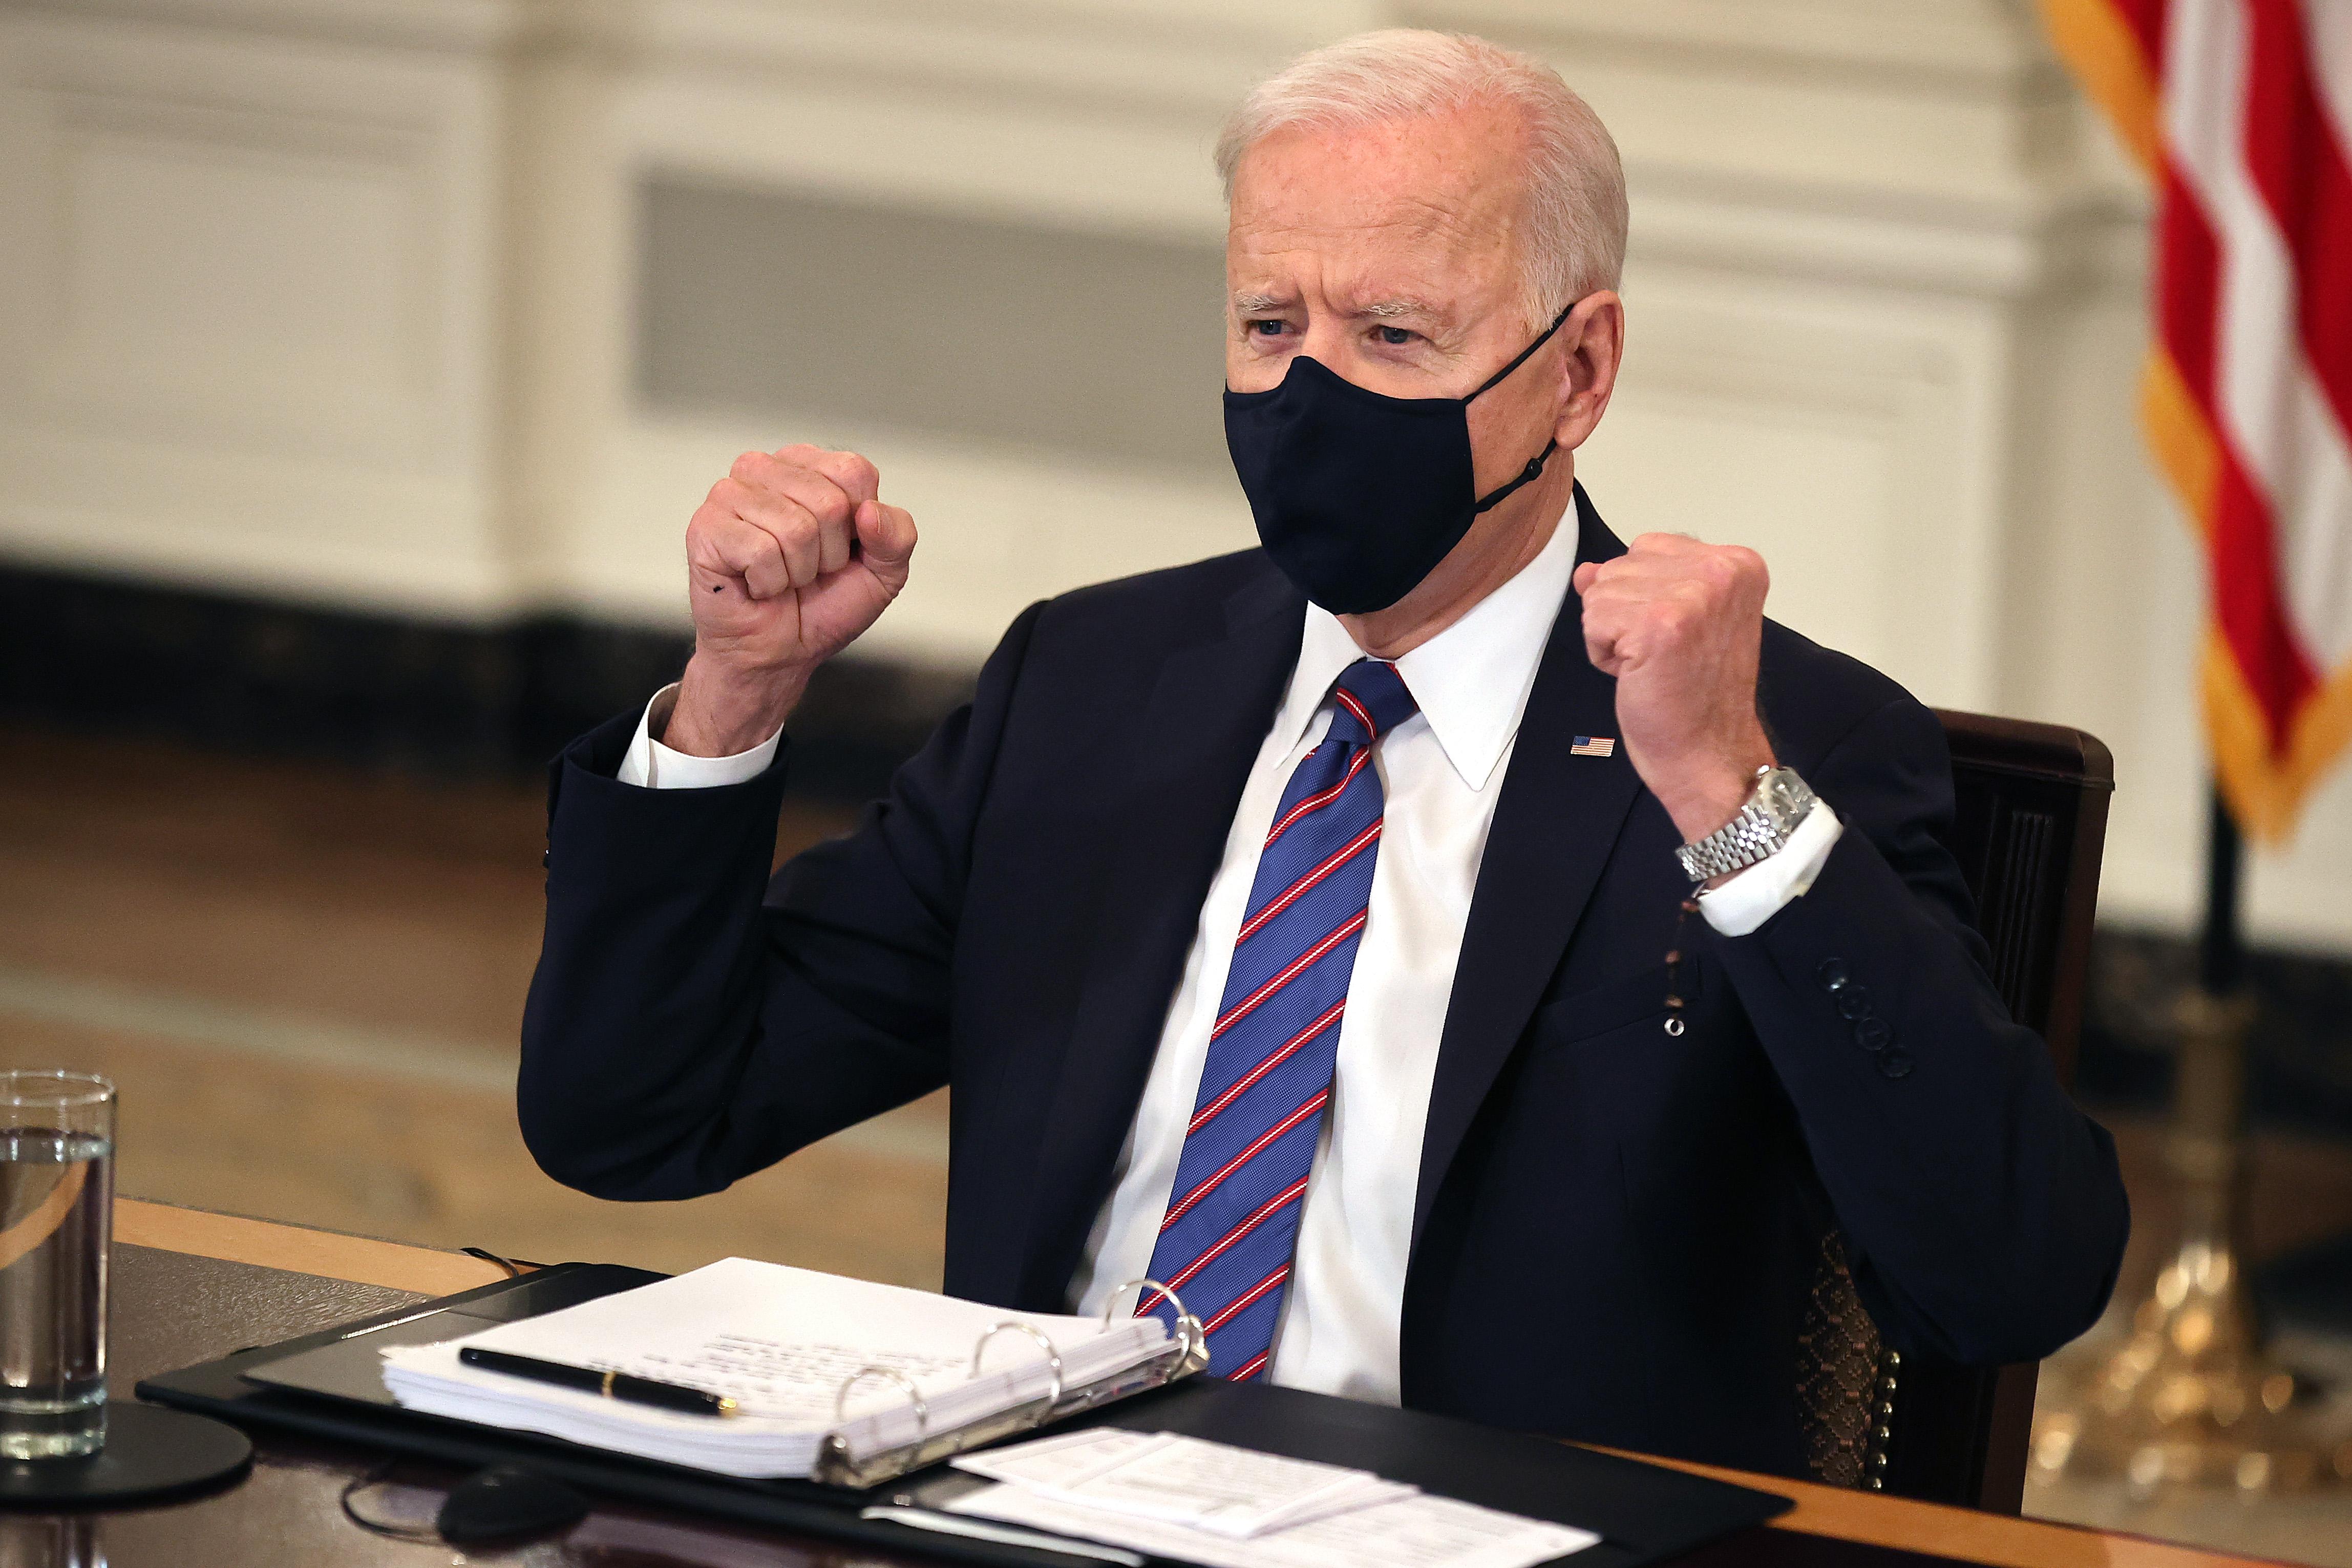 Joe Biden, wearing a face mask, sits at a table and raises his fists.